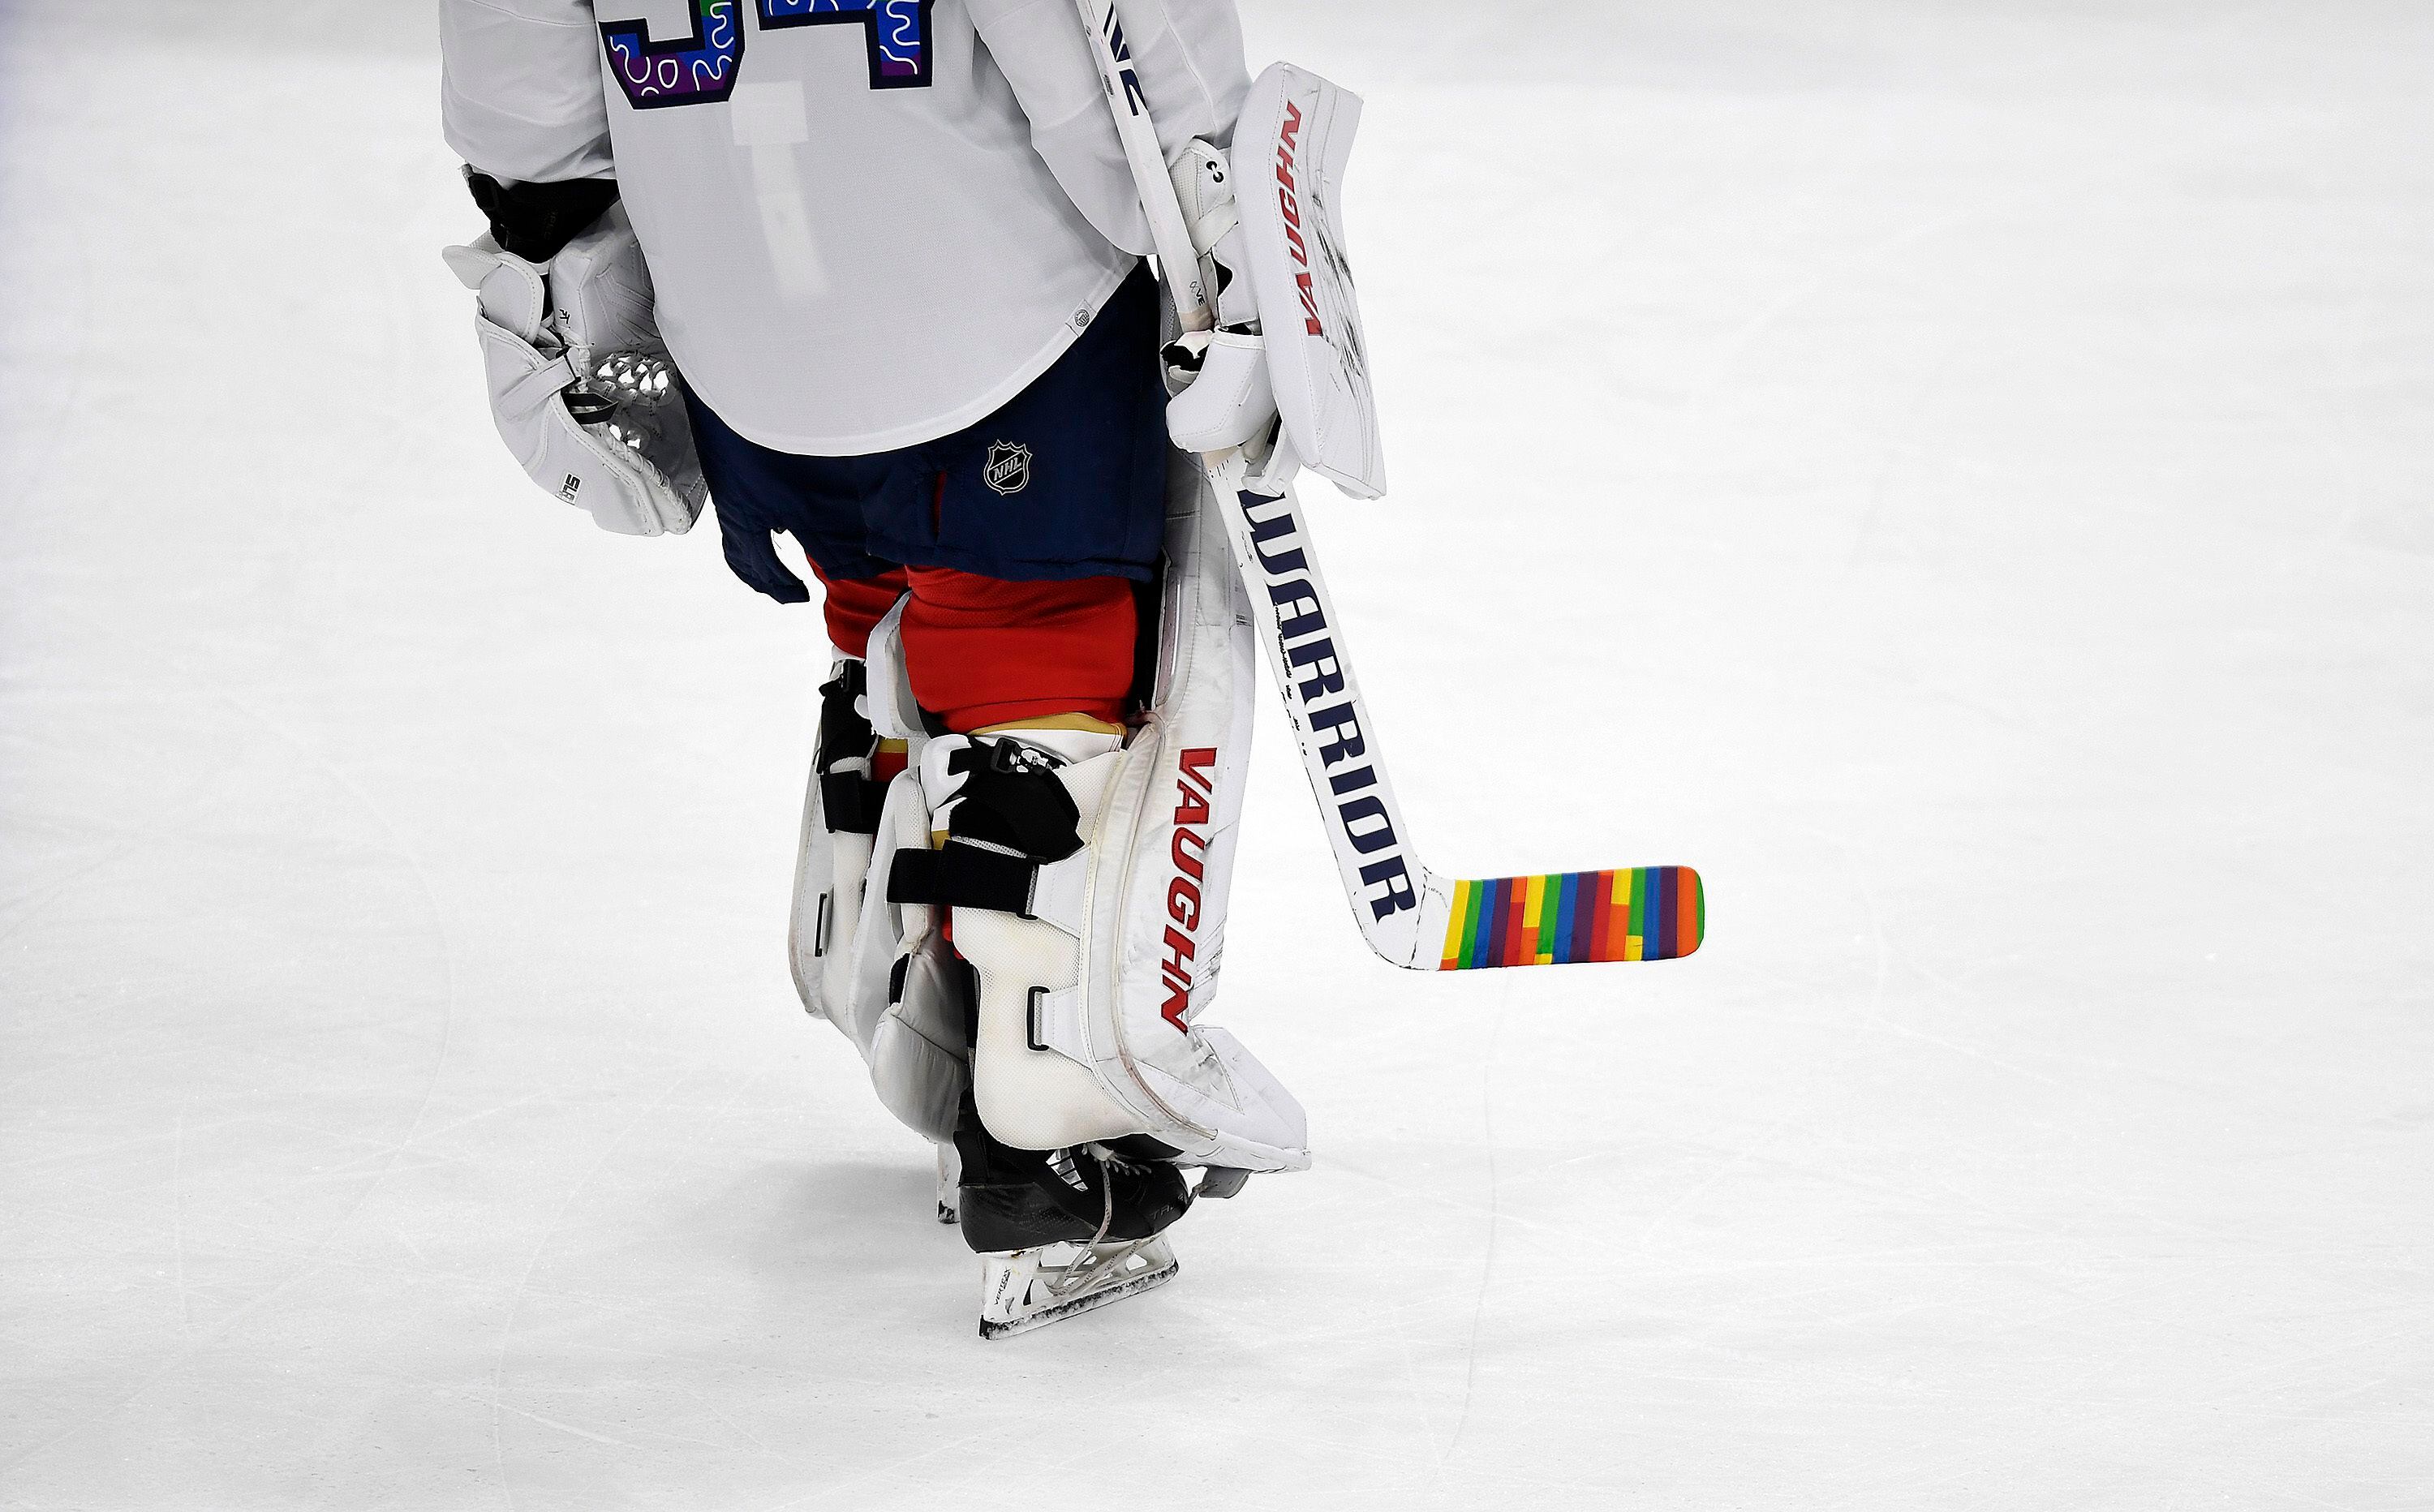 NHL rescinds ban on rainbow-colored Pride tape, allowing players to use it  on the ice this season